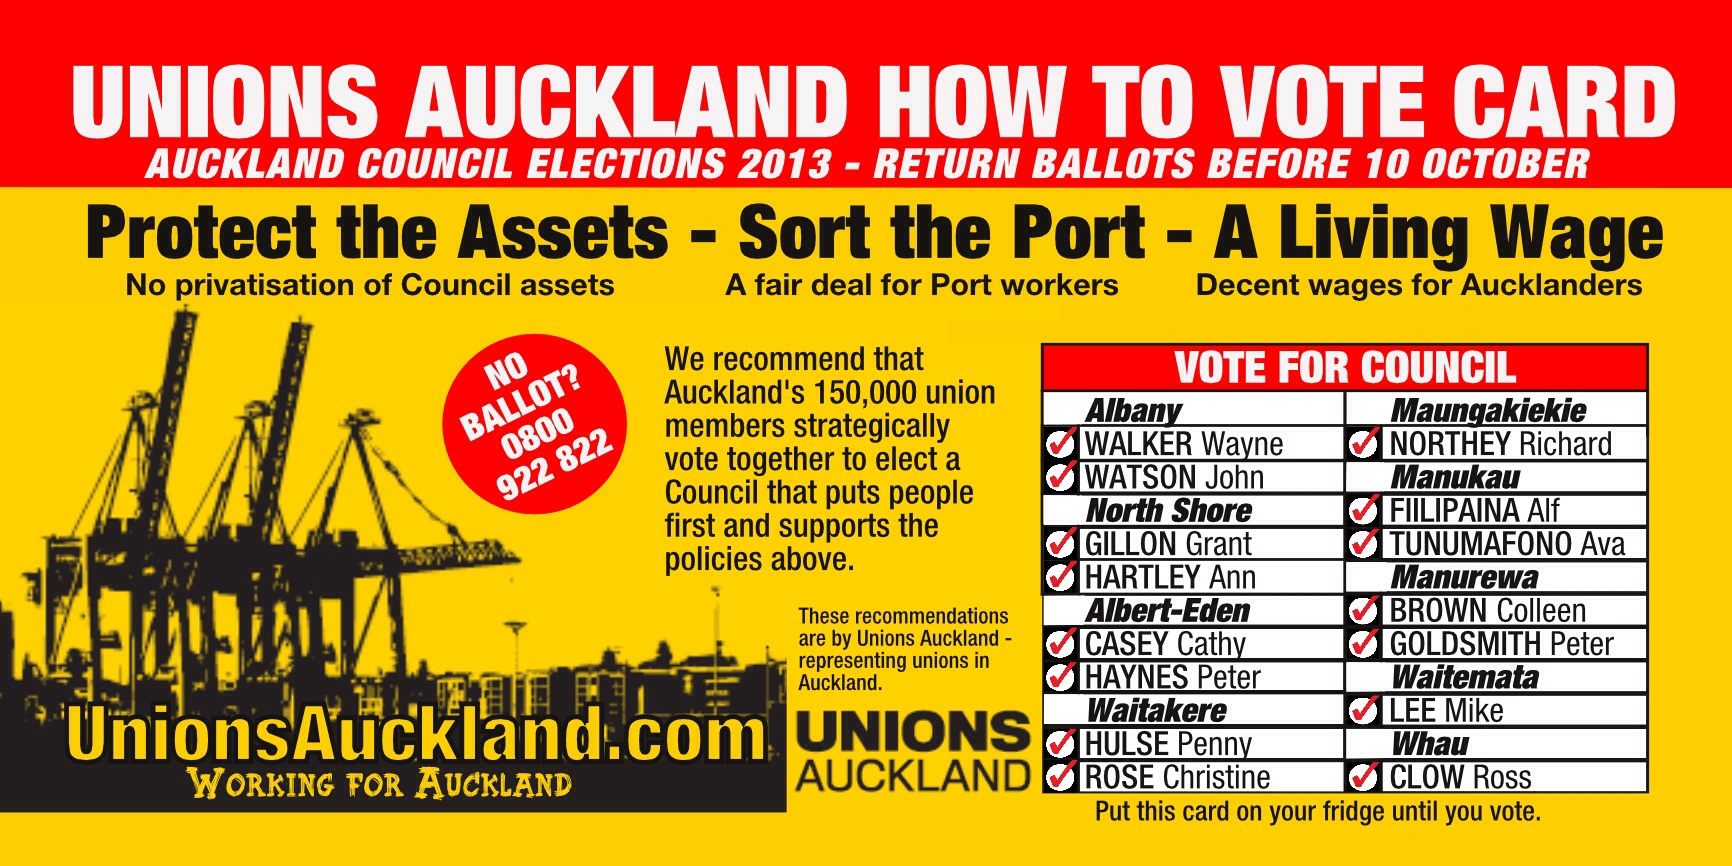 unions-auckland-s-list-of-supported-council-candidates-the-standard